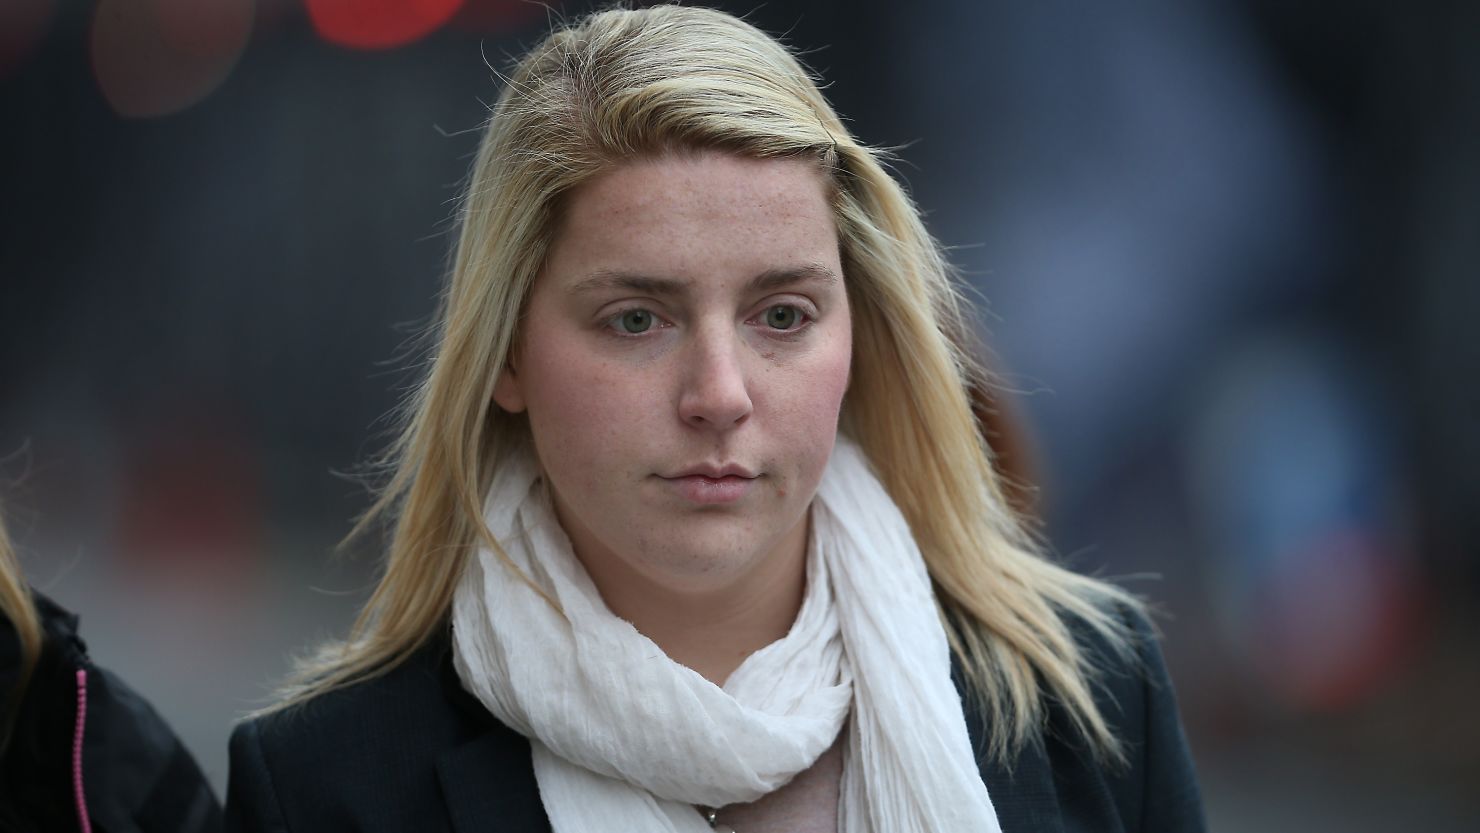 Aimee West, fiancee of  Lee Rigby, arrives at the Central Criminal Court in London on December 17.